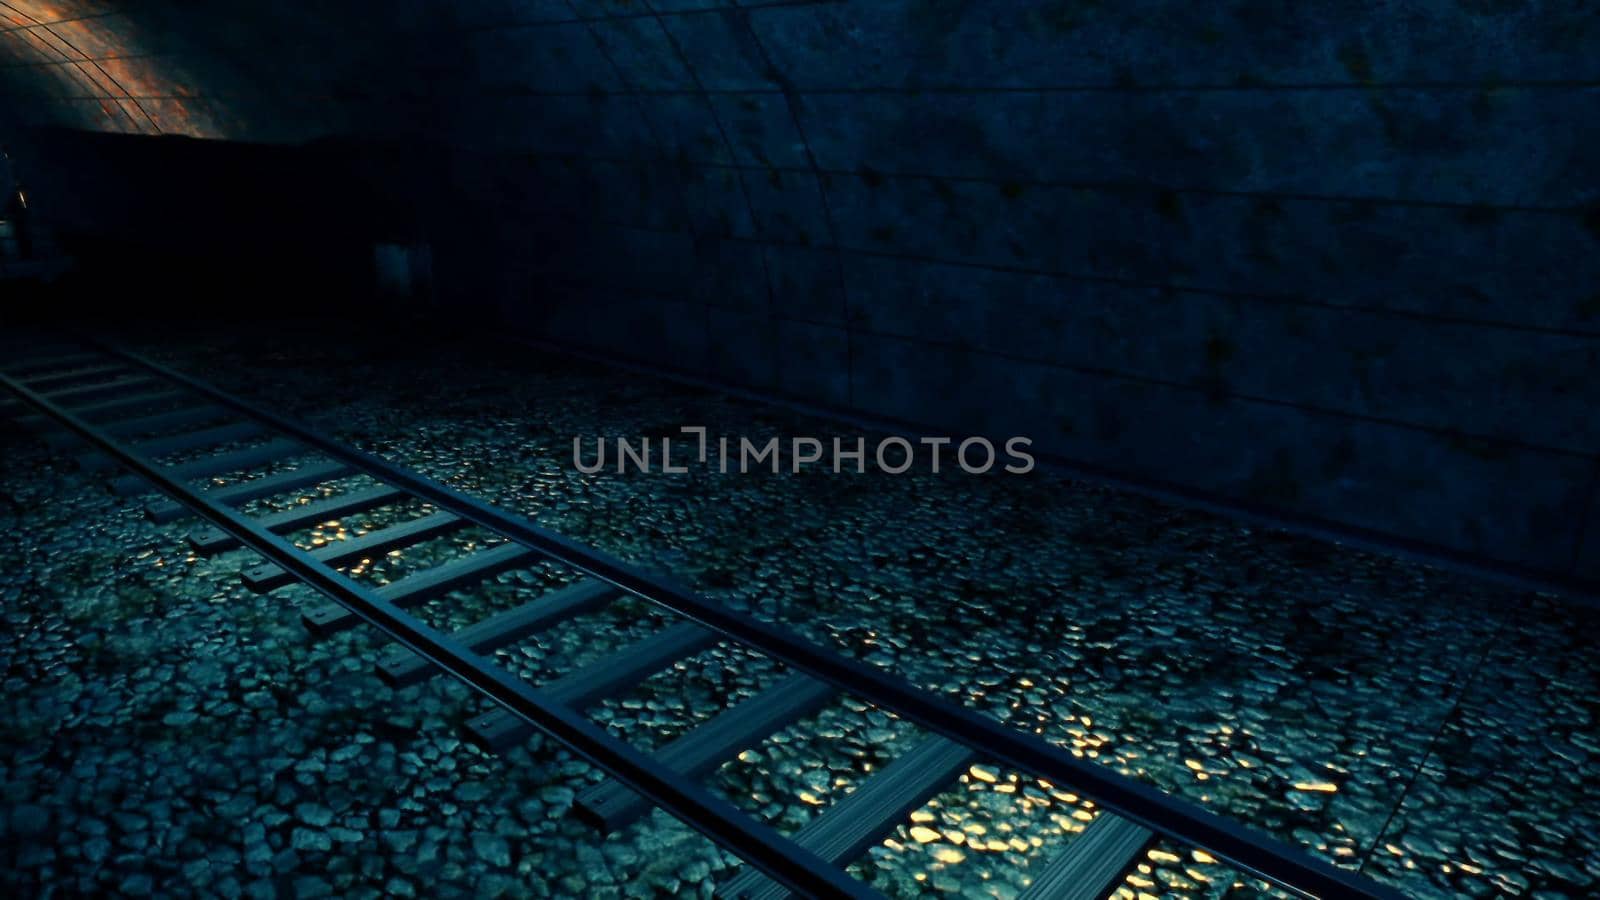 Steam old train in tunnel 3D rendering by designprojects